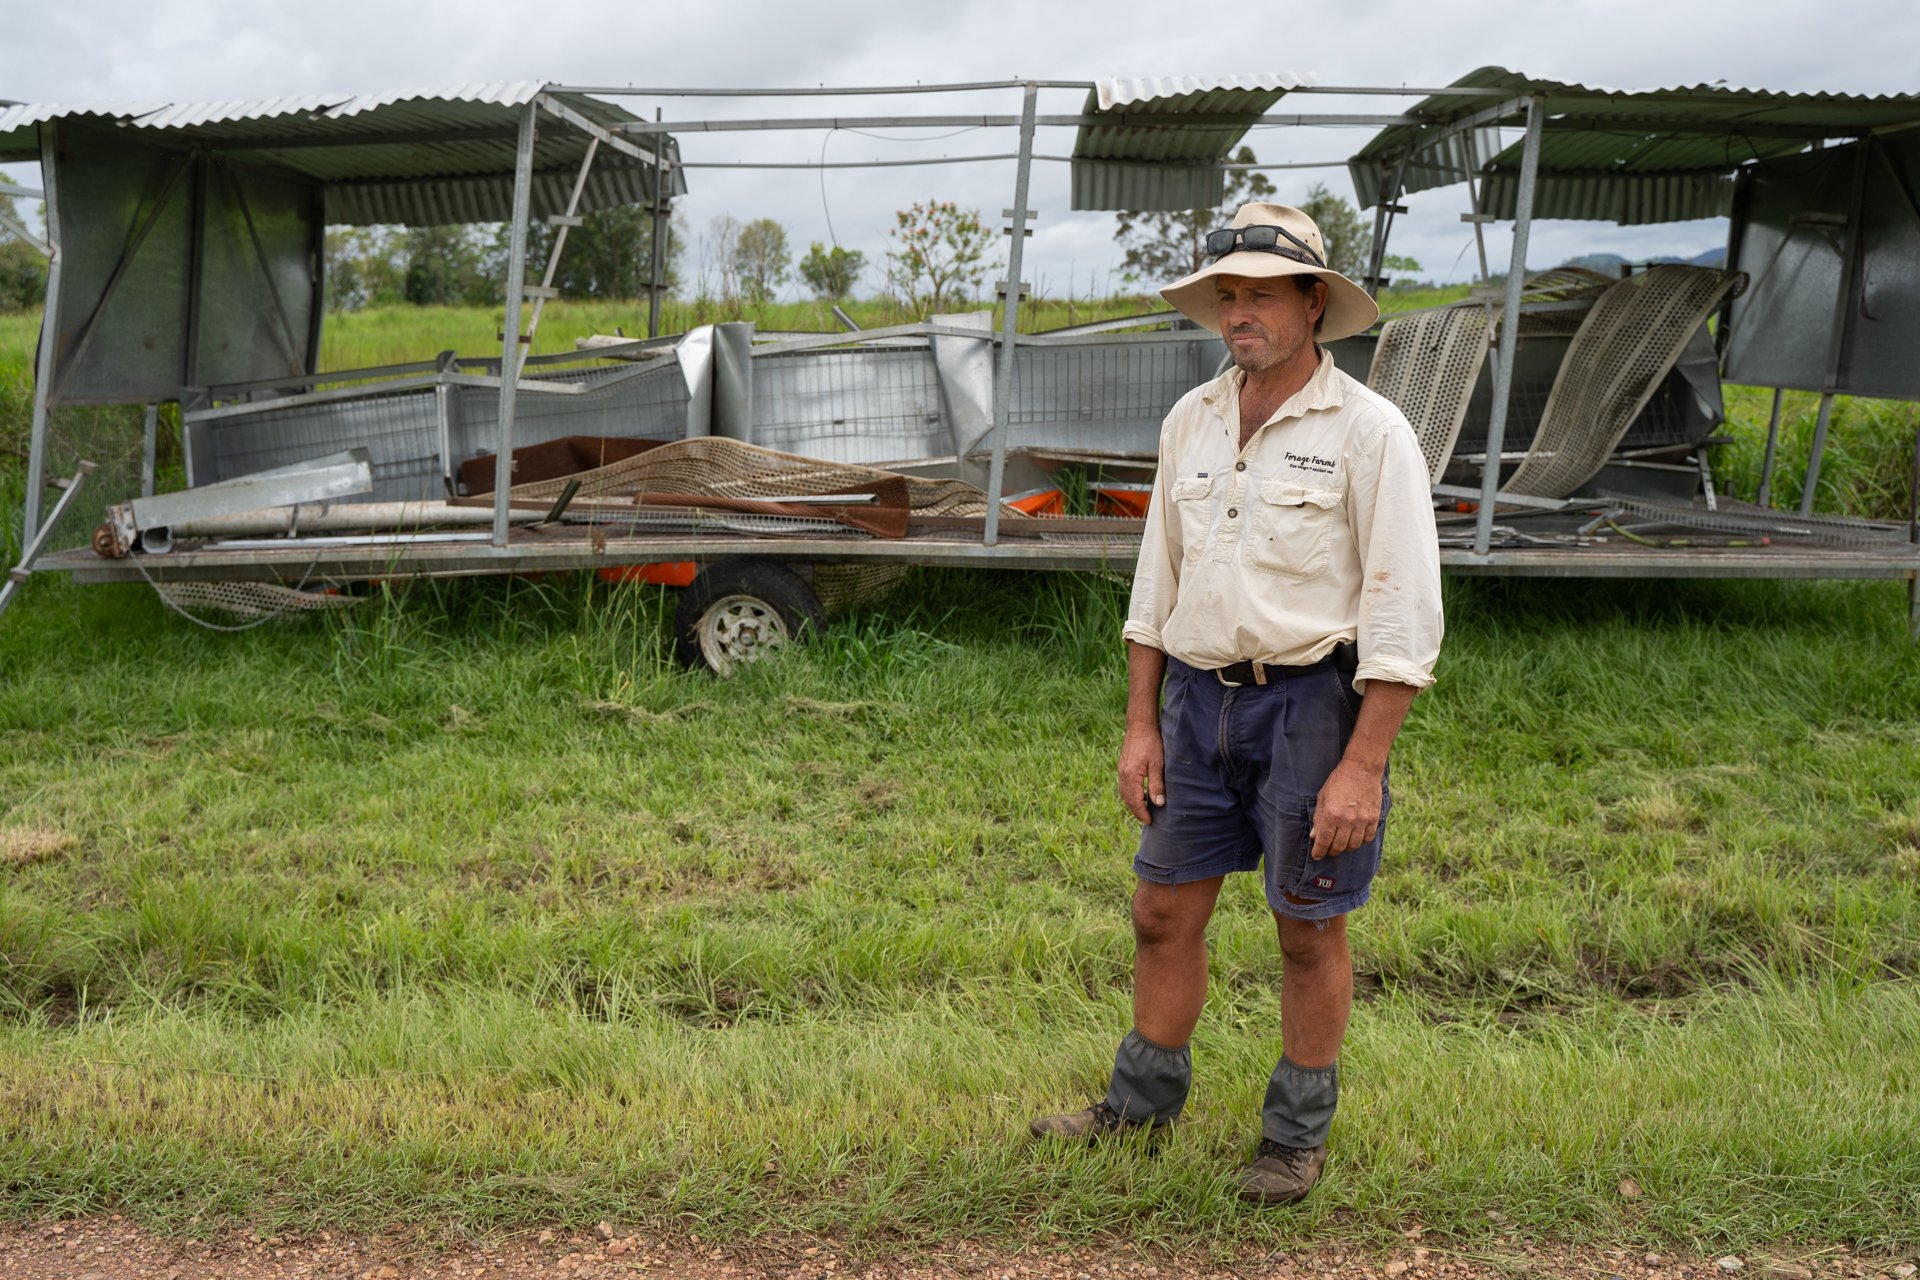  On Boxing Day 2023, a sudden, 15-minute ‘mini-tornado’ ripped through Forage Farms in Kybong. The wind picked up six mobile chicken houses and sent them flying through the air 40 metres across paddocks and into each other.   